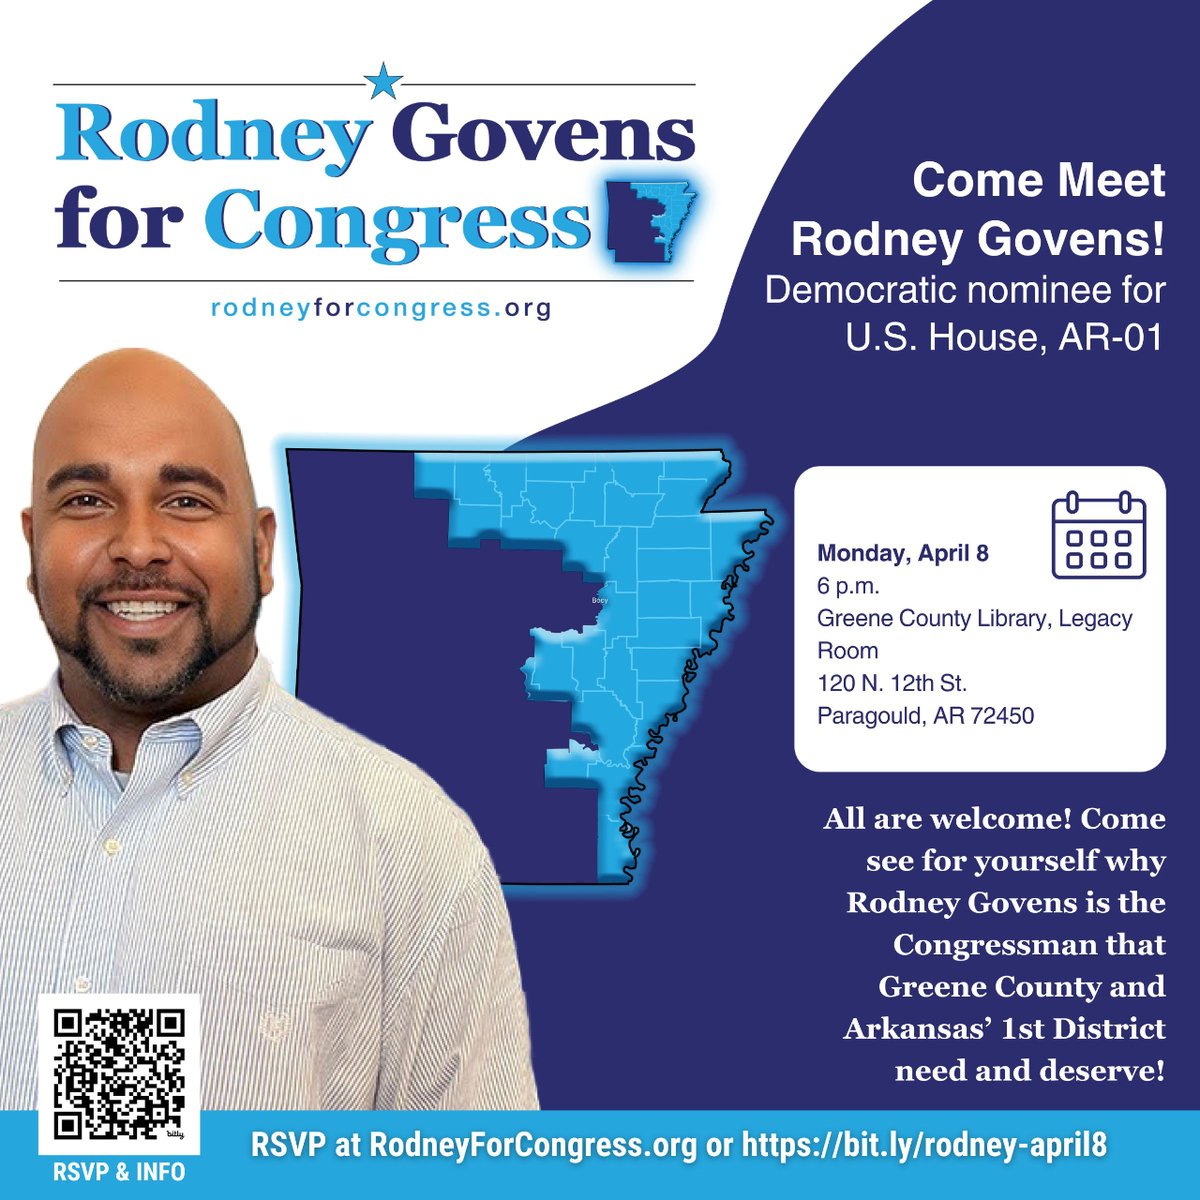 Do you know someone in the Paragould area? Support Rodney's campaign by sharing and tagging your peeps! 

#arpx #arkansas #elections2024 #paragould #ridingwithrodney